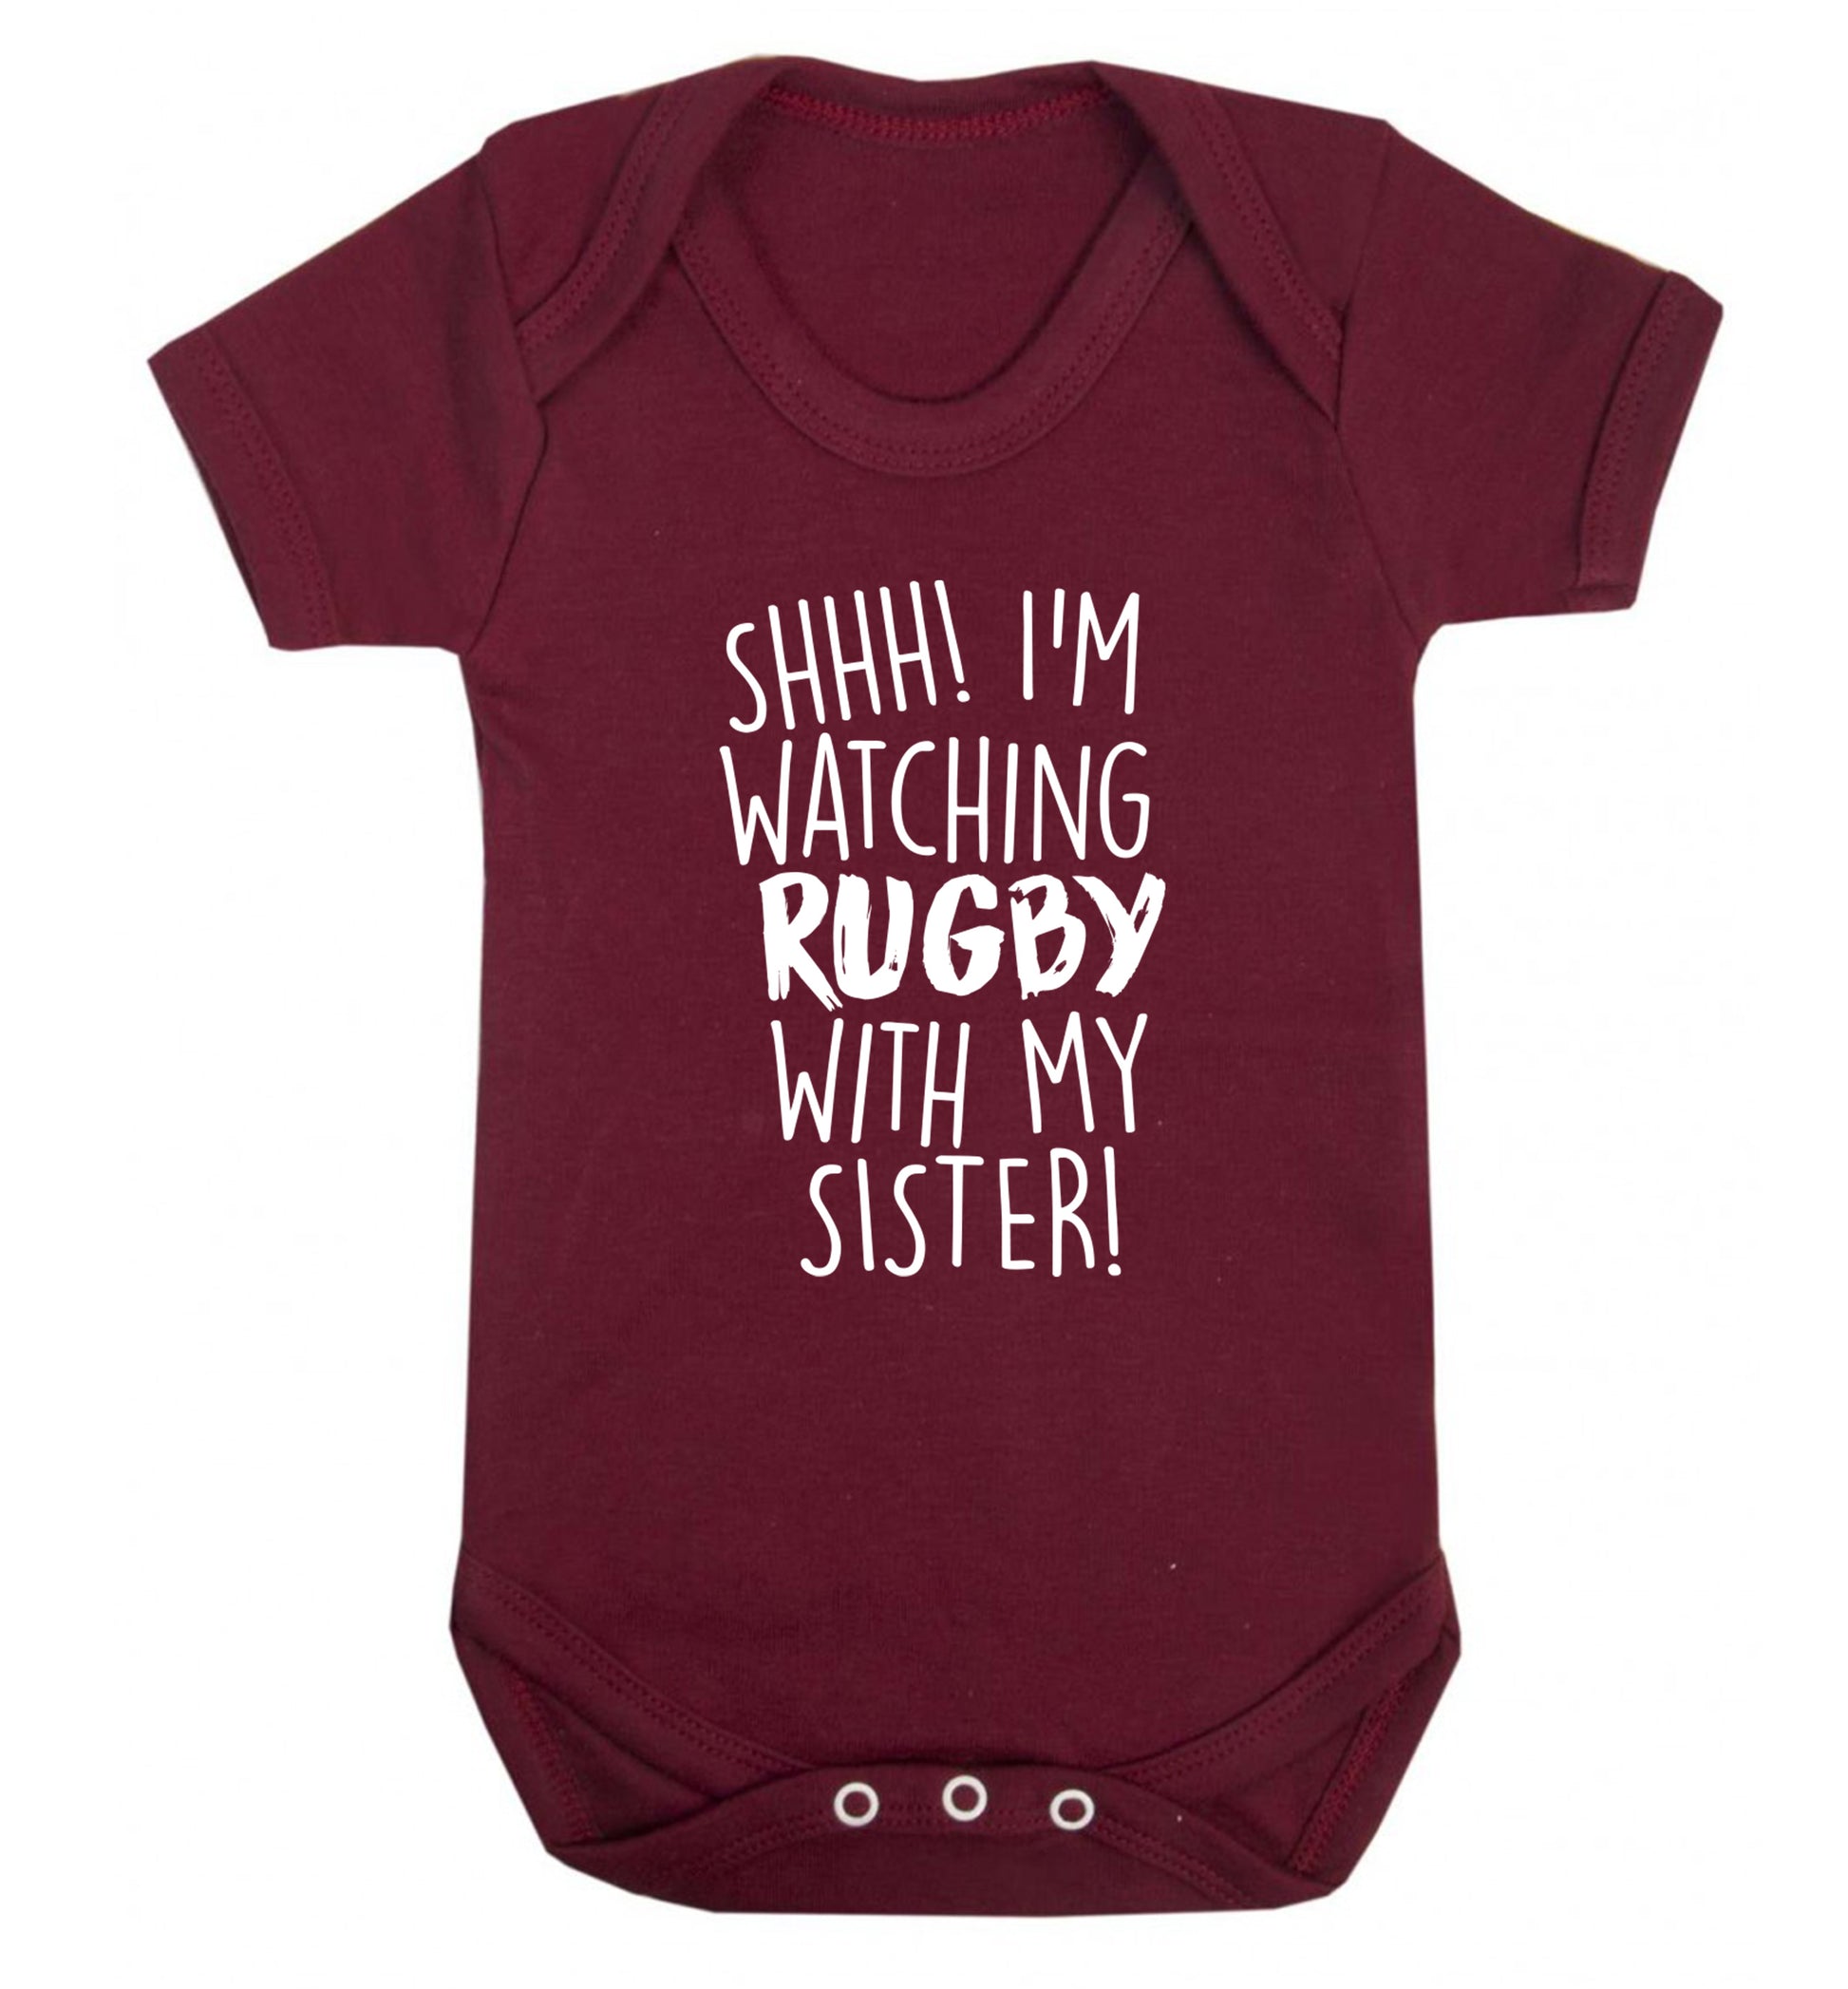 Shh... I'm watching rugby with my sister Baby Vest maroon 18-24 months